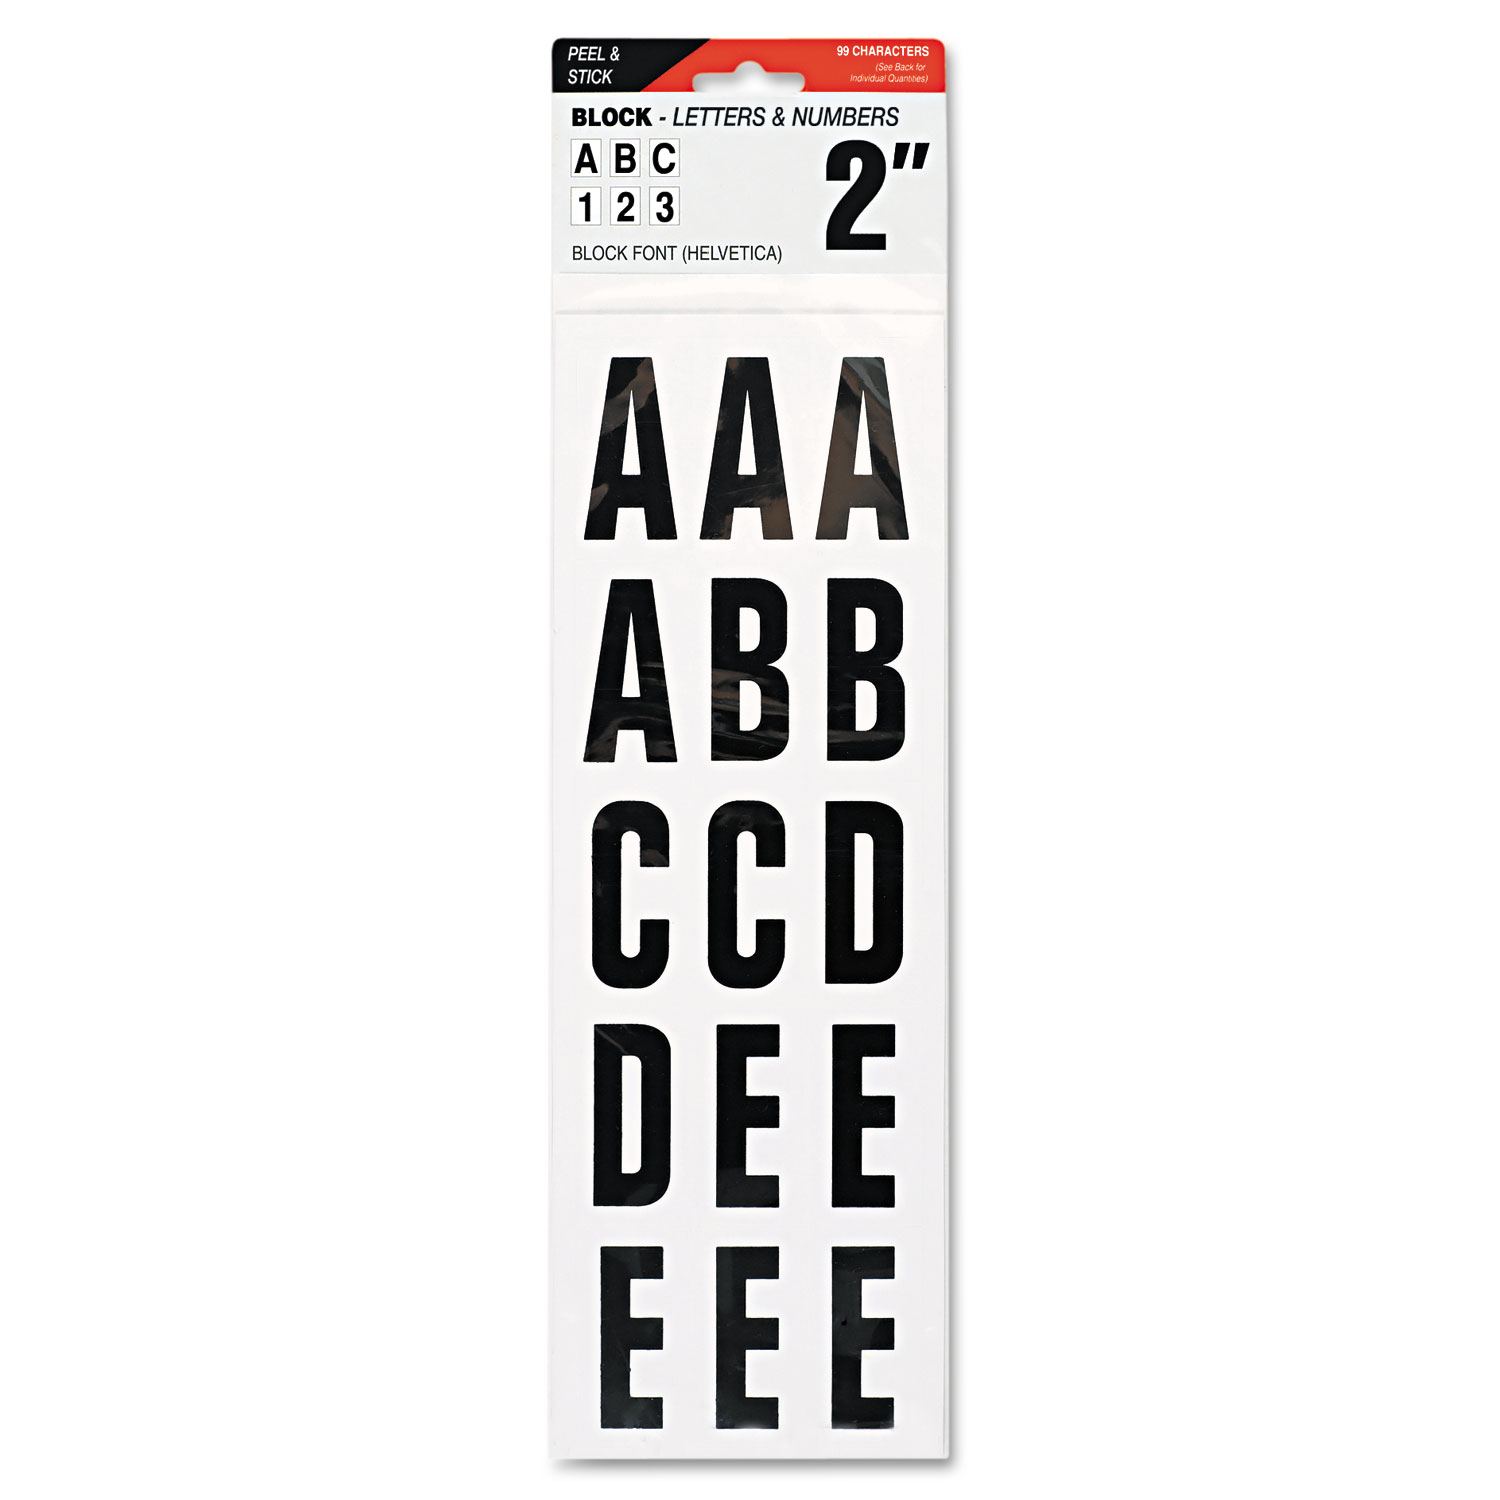  COSCO 098131 Letters, Numbers & Symbols, Adhesive, 2, Black, 84 Characters (COS098131) 